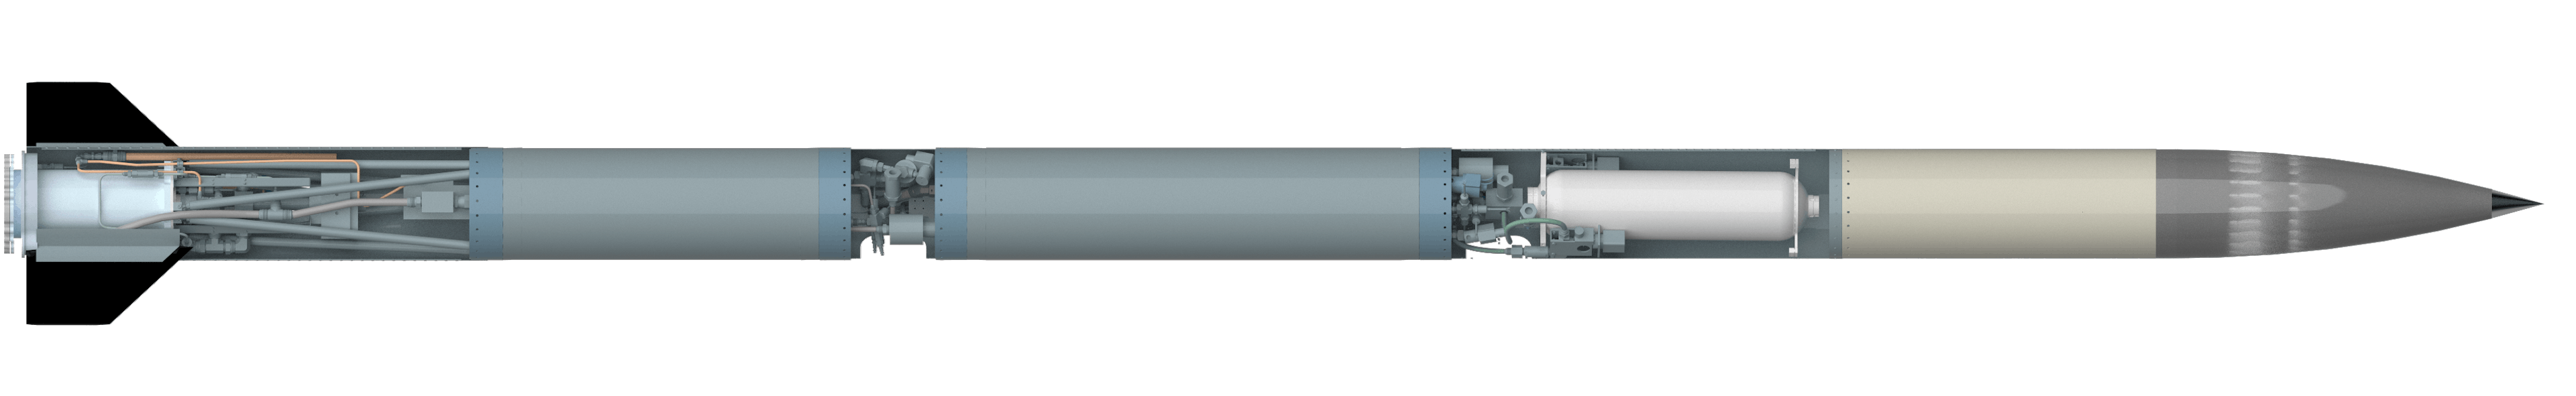 Clementine is MASA’s newest supersonic sounding rocket